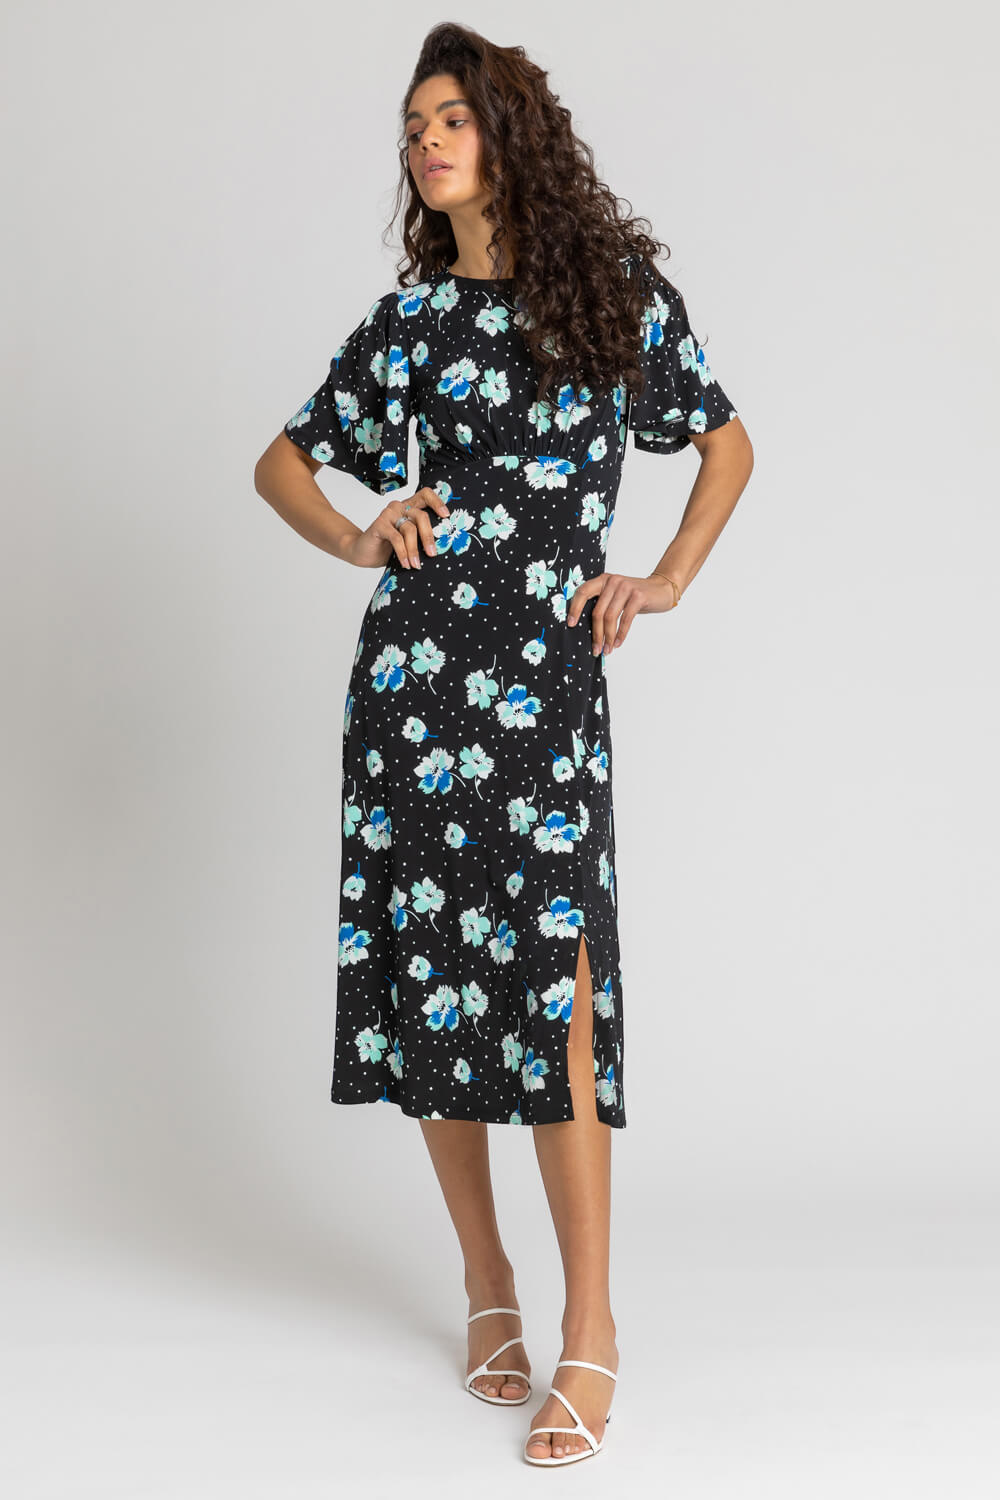 Black Spotted Floral Fit & Flare Midi Dress, Image 3 of 5